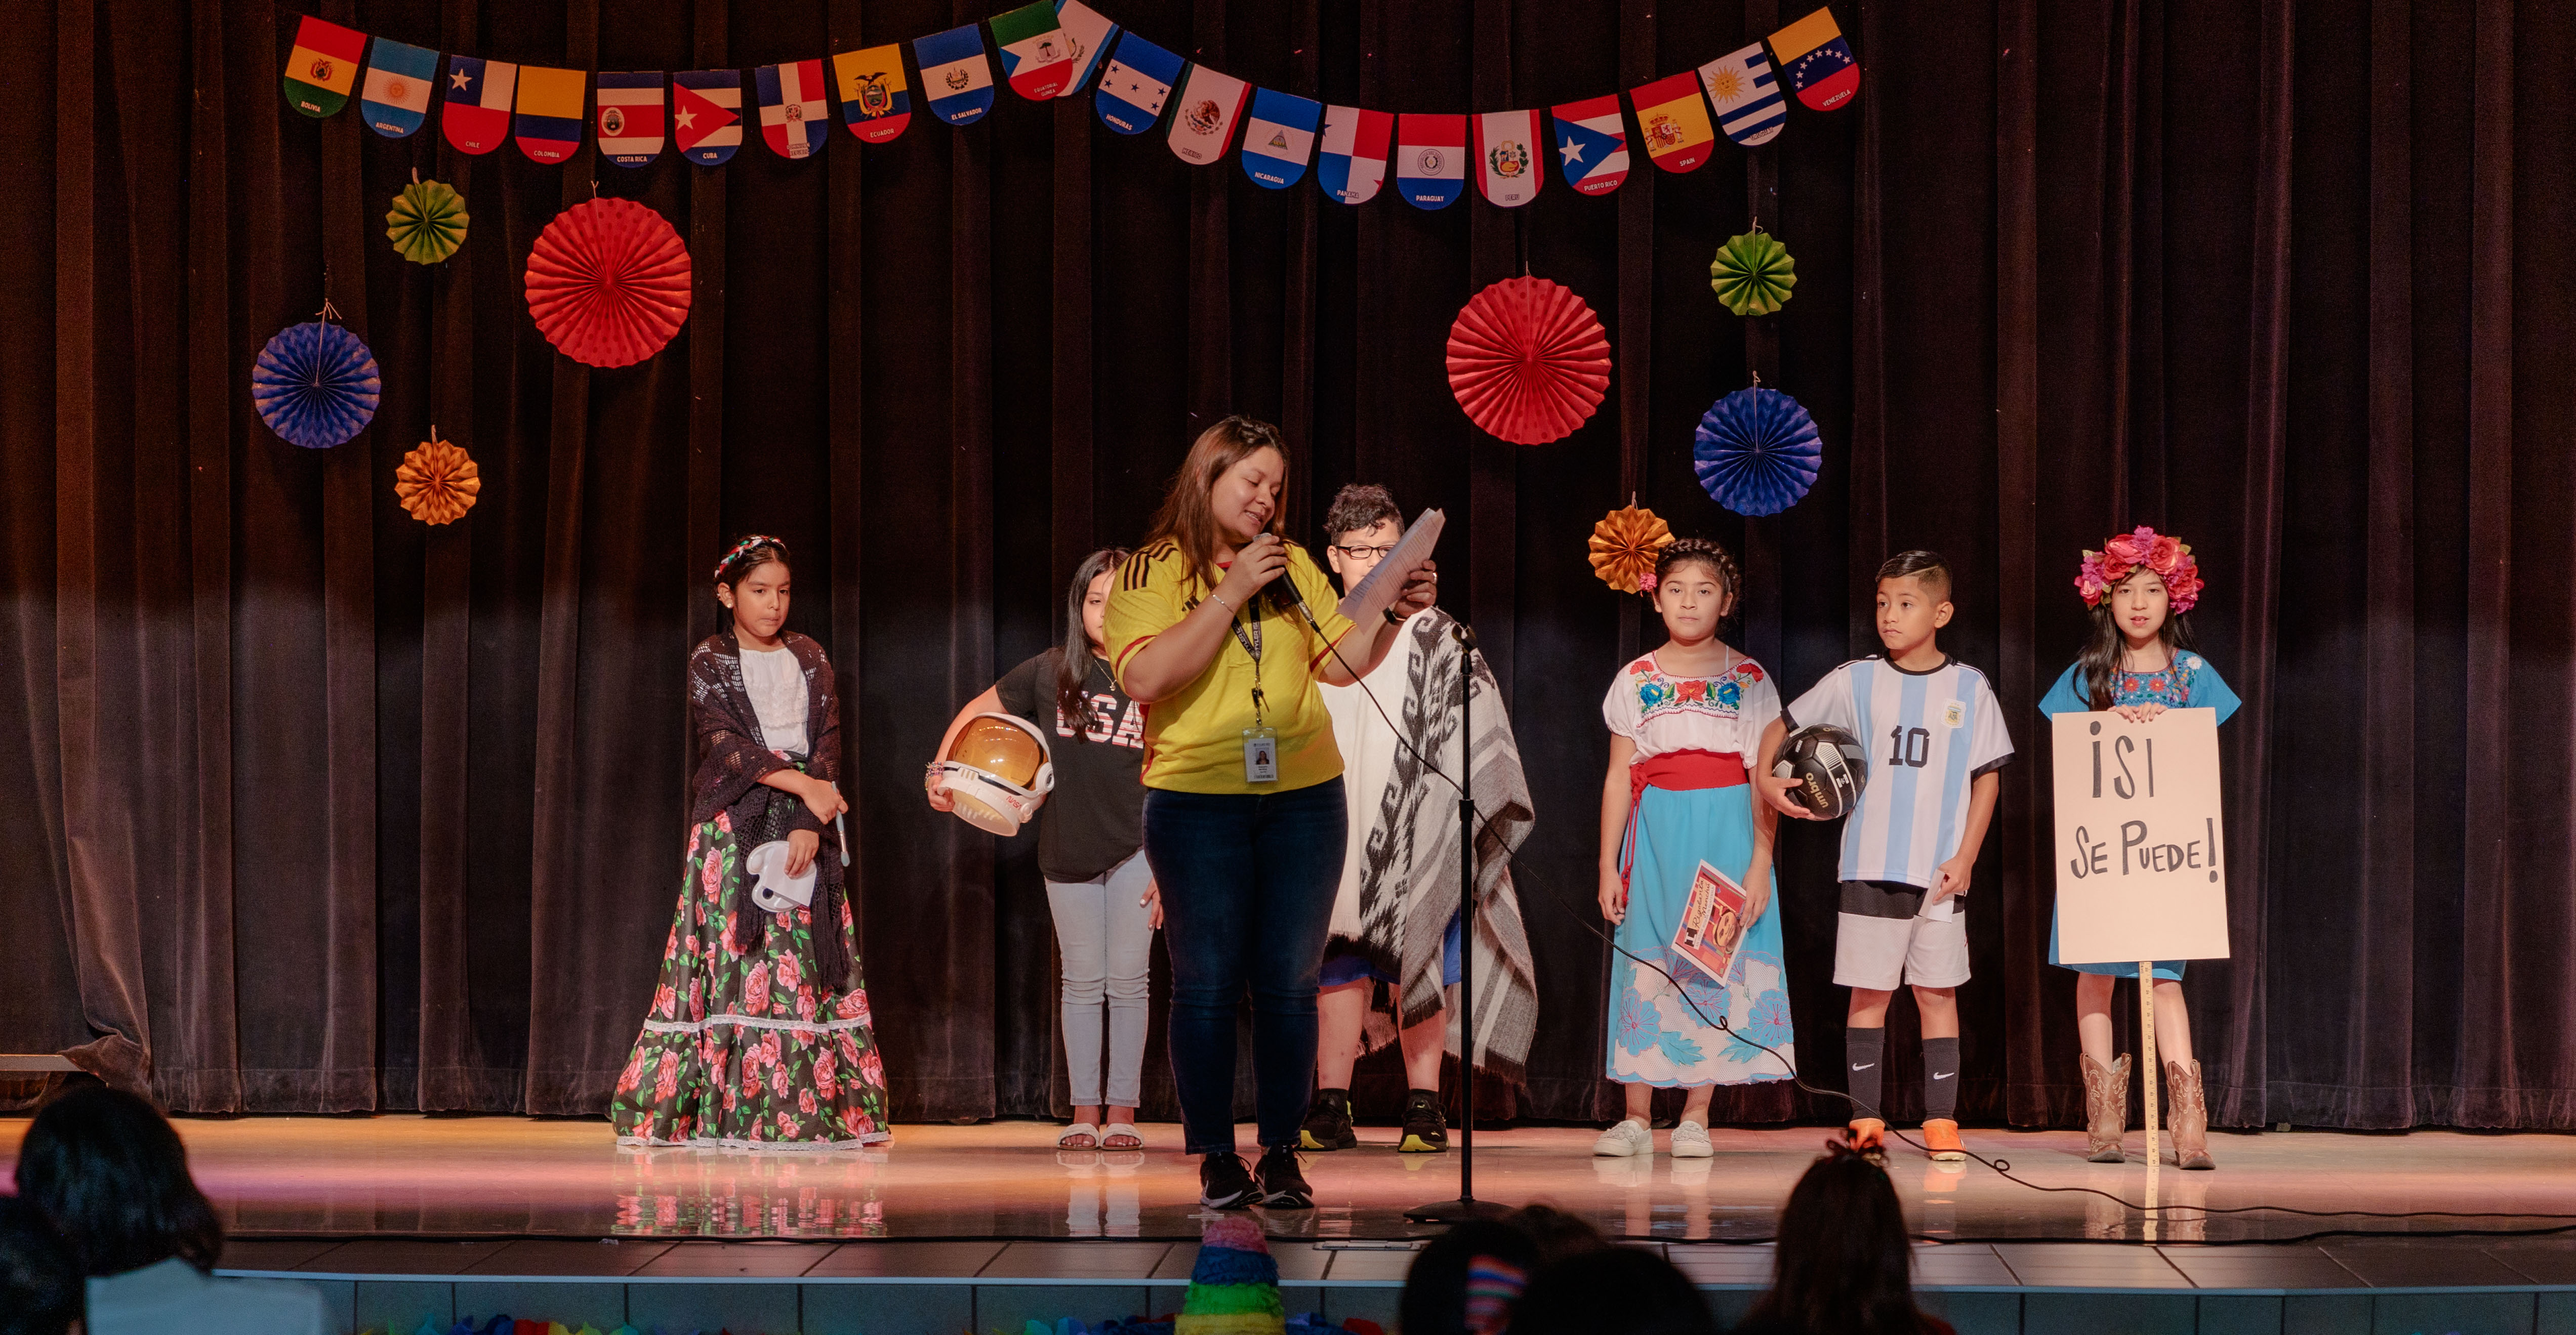 elementary age students dressed in traditional Hispanic clothing